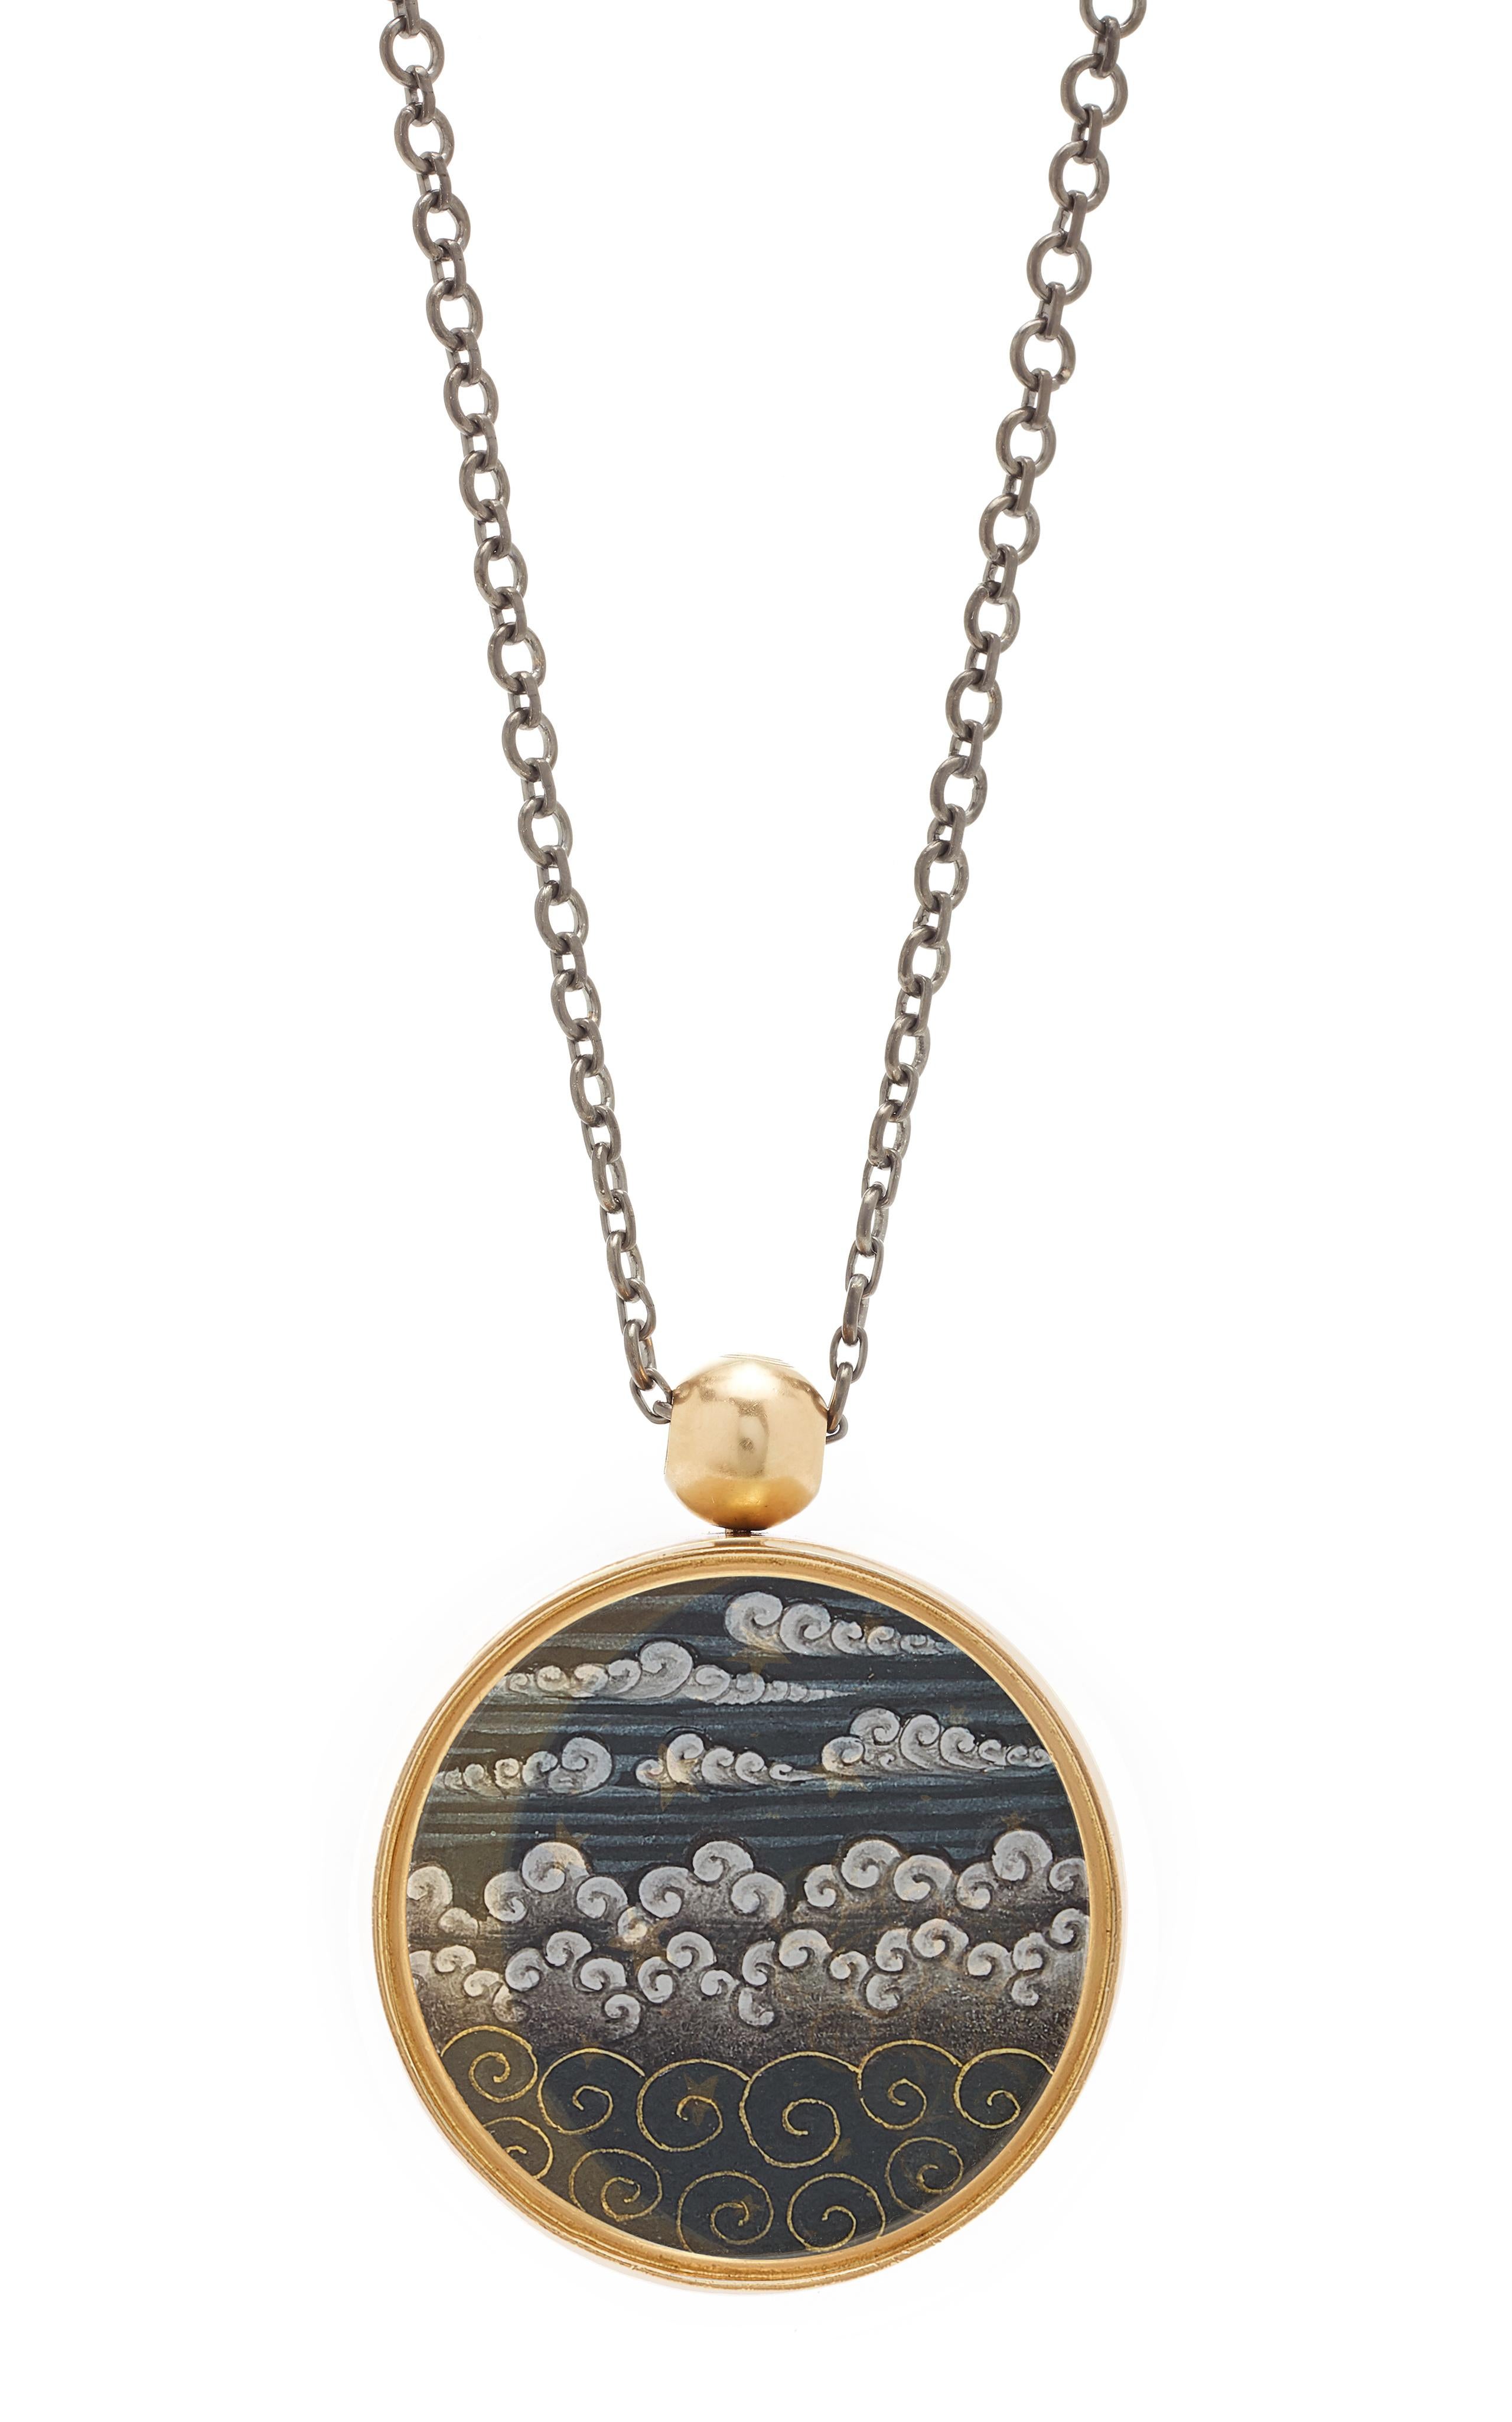 Ouroboros hand-painted Indian miniatures set in 18 karat gold pendant, two sided, with an 18 karat gold handmade chain or a black rhodium plated silver chain. 

The price here is with a gold chain, please message Ouroboros for the price with the